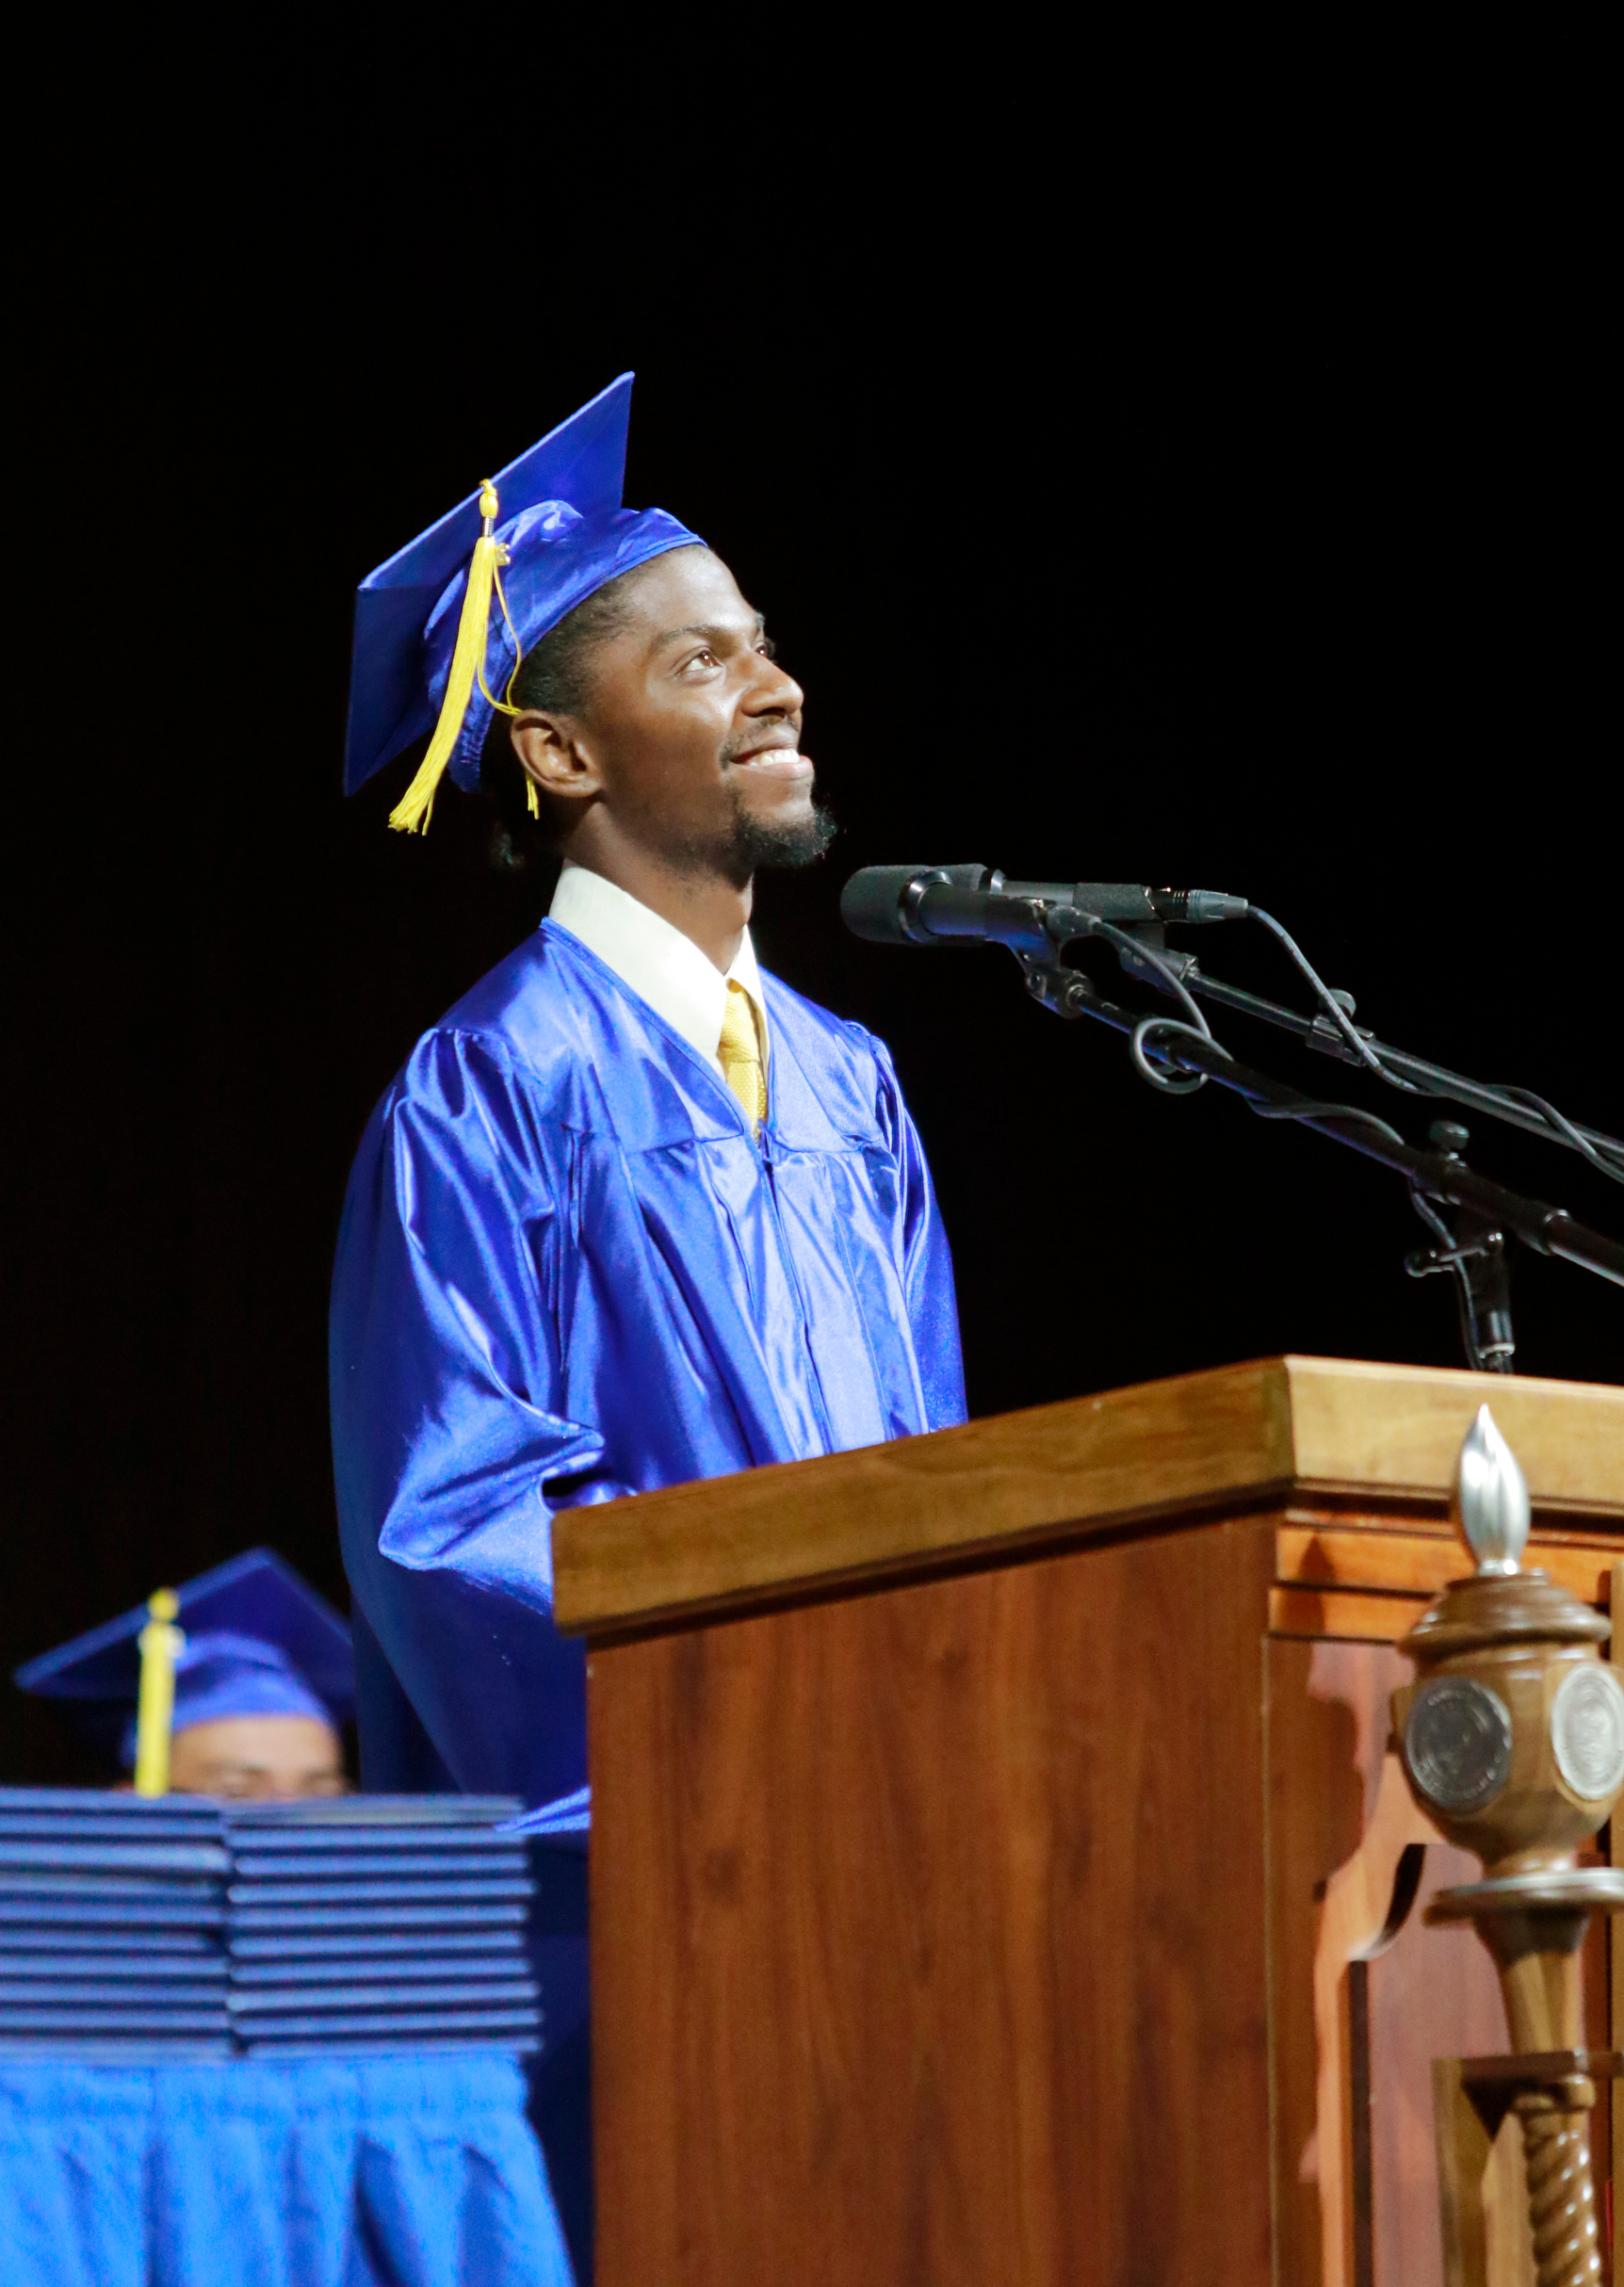 2022 Student Speaker at CSN's Commencement Ceremony